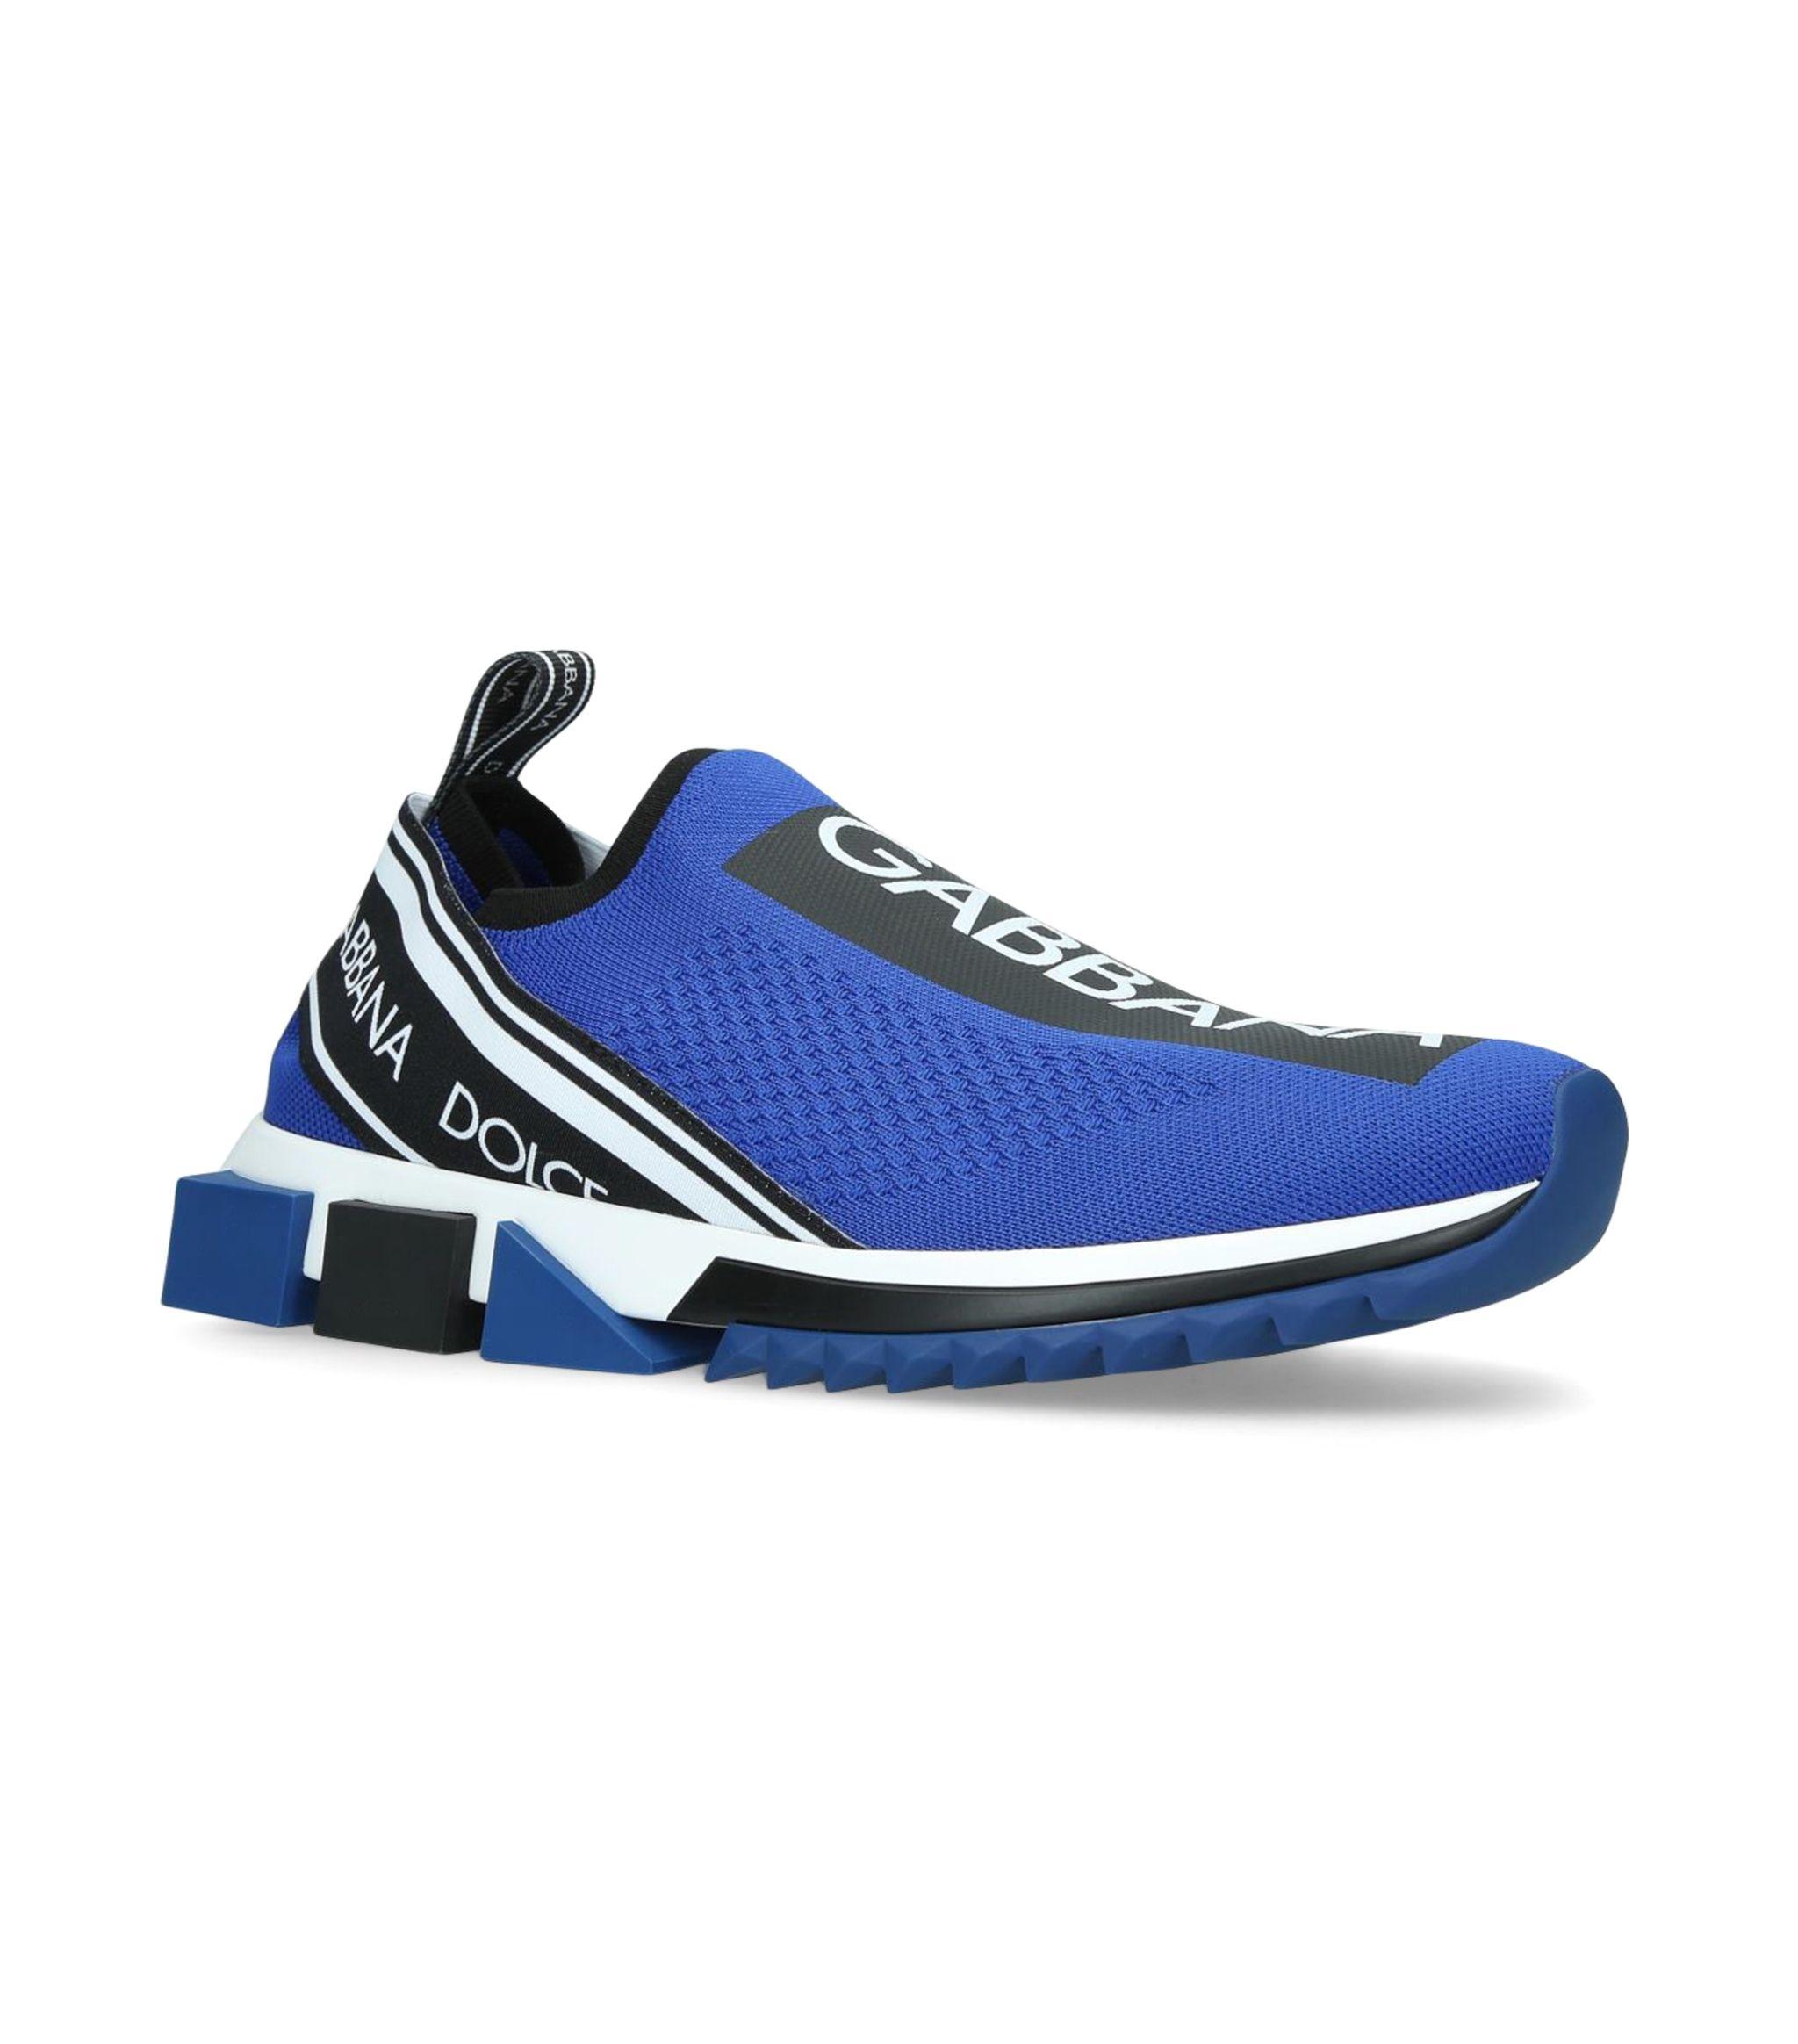 Dolce & Gabbana Leather Sorrento Sneakers in Blue for Men - Lyst